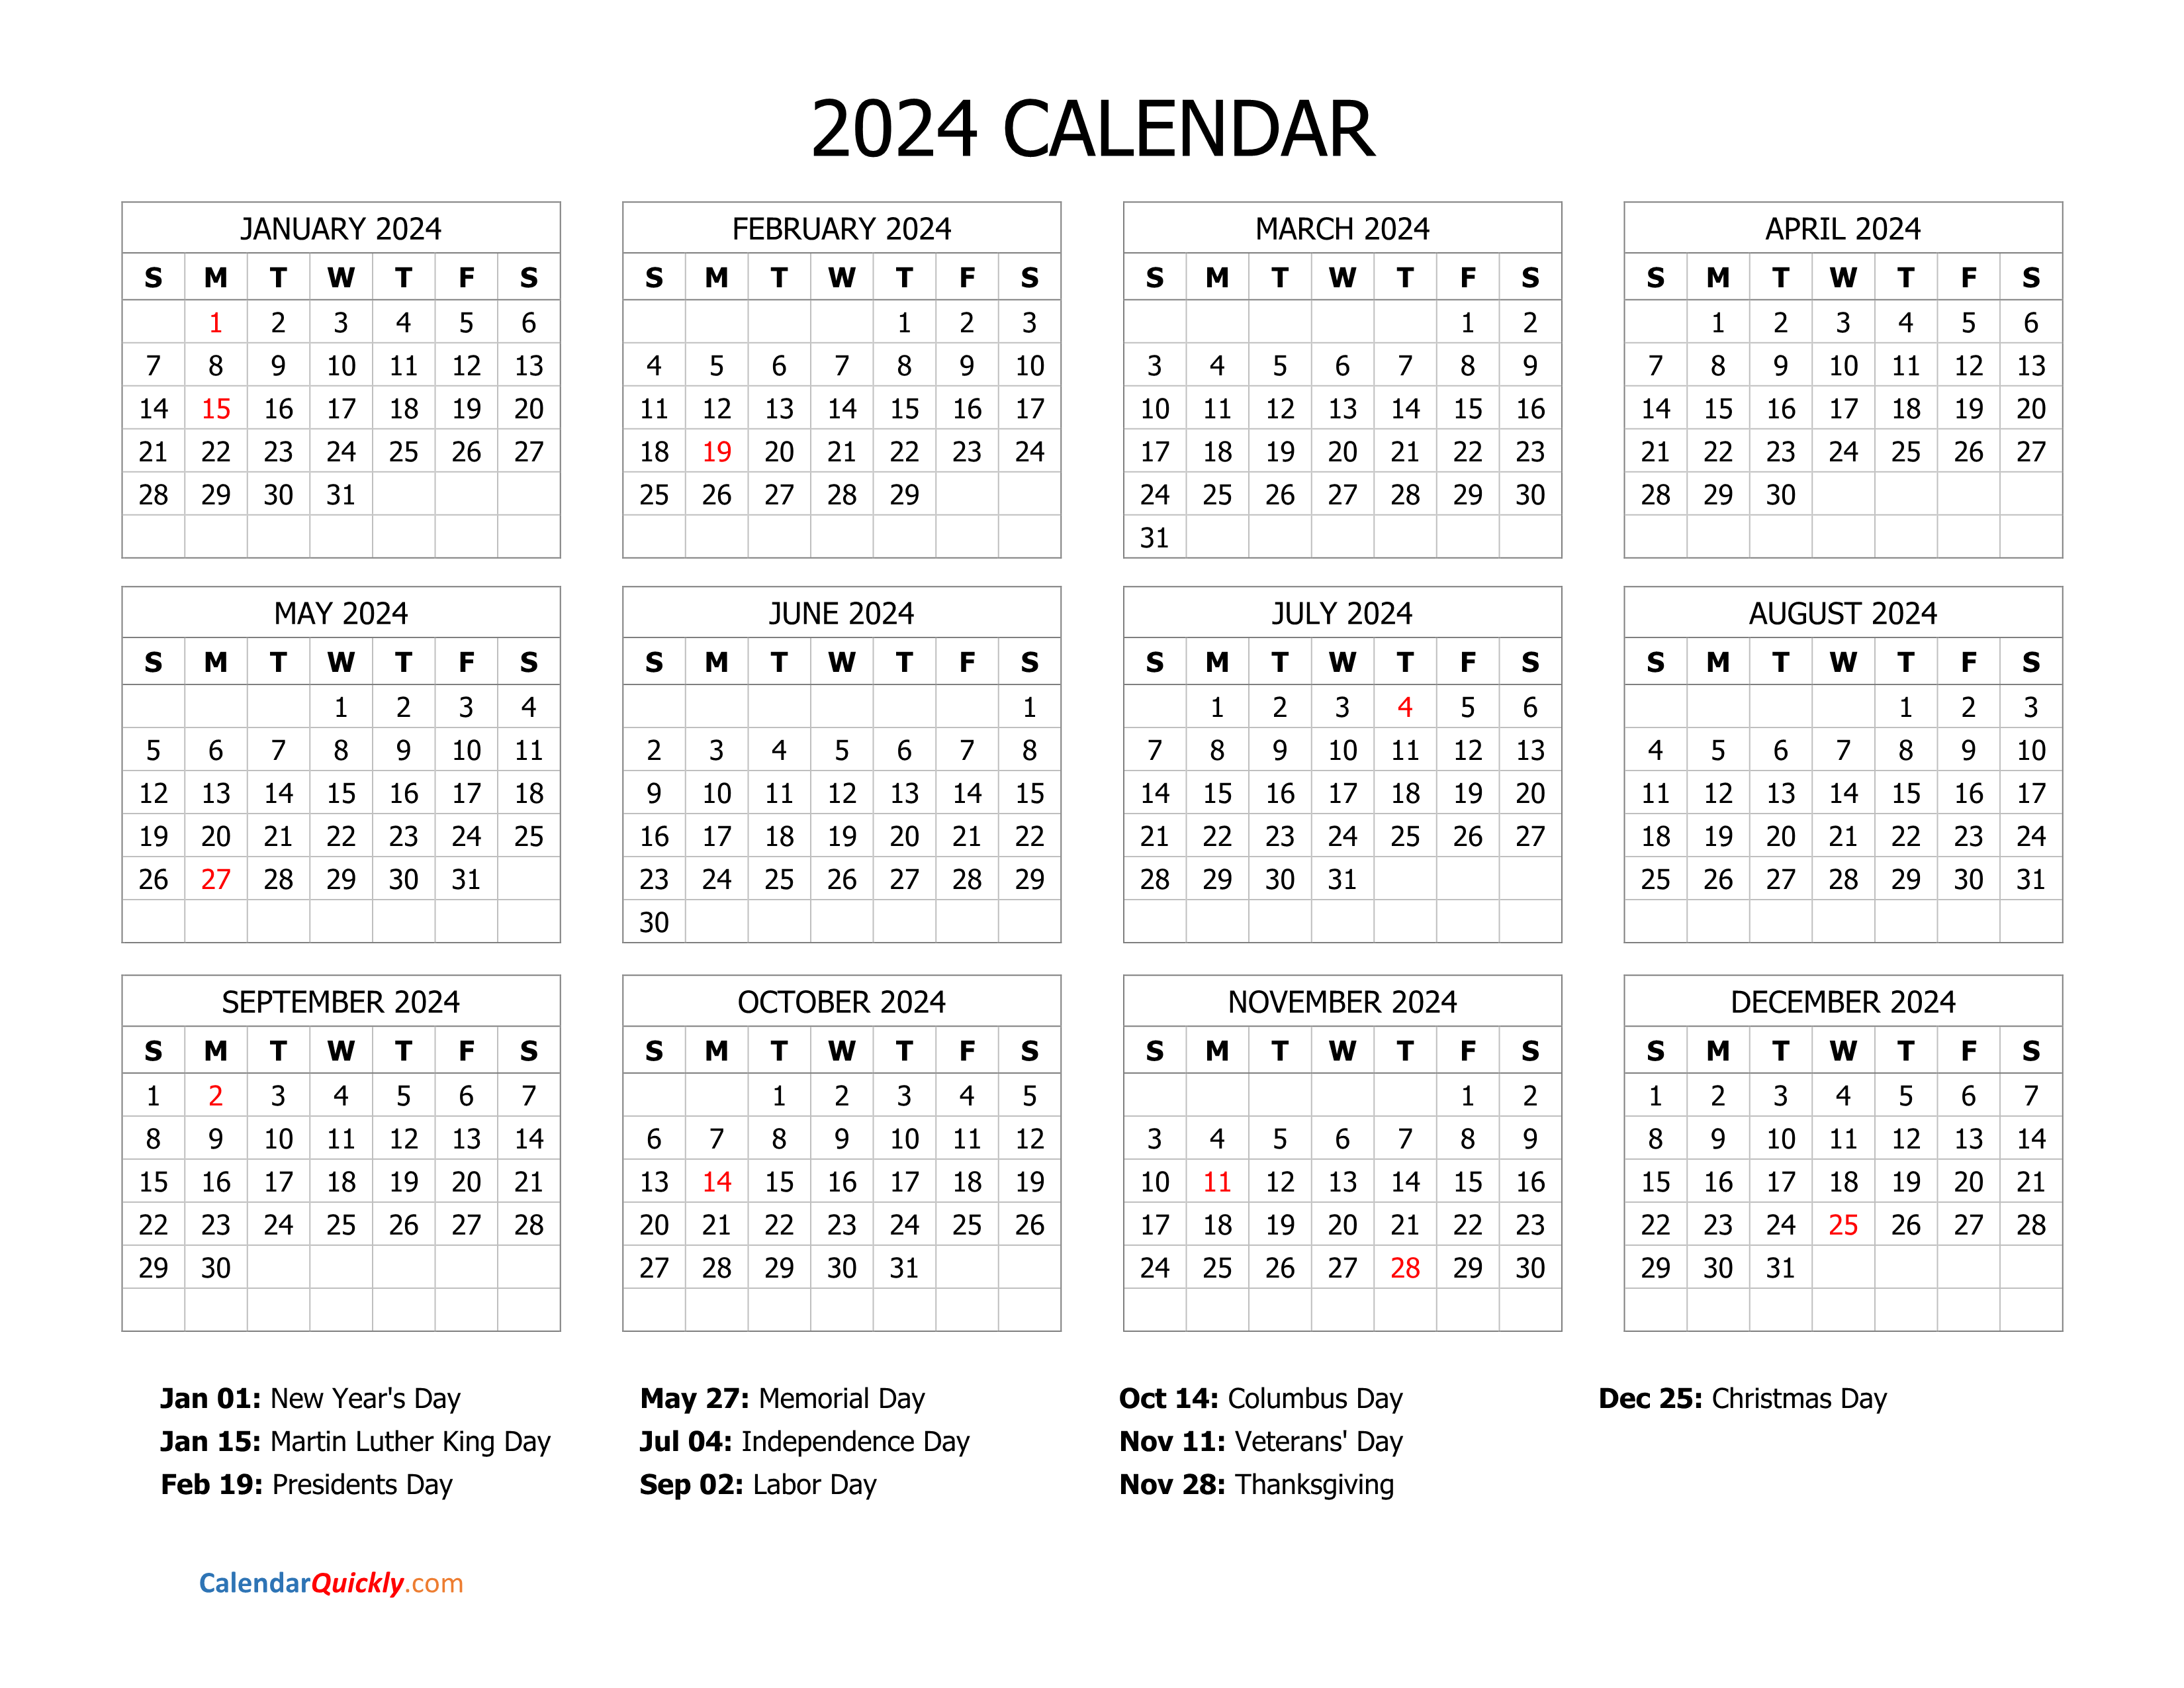 2024 Calendar Free Printable - Free Printable 2024 Calendar With Holidays India